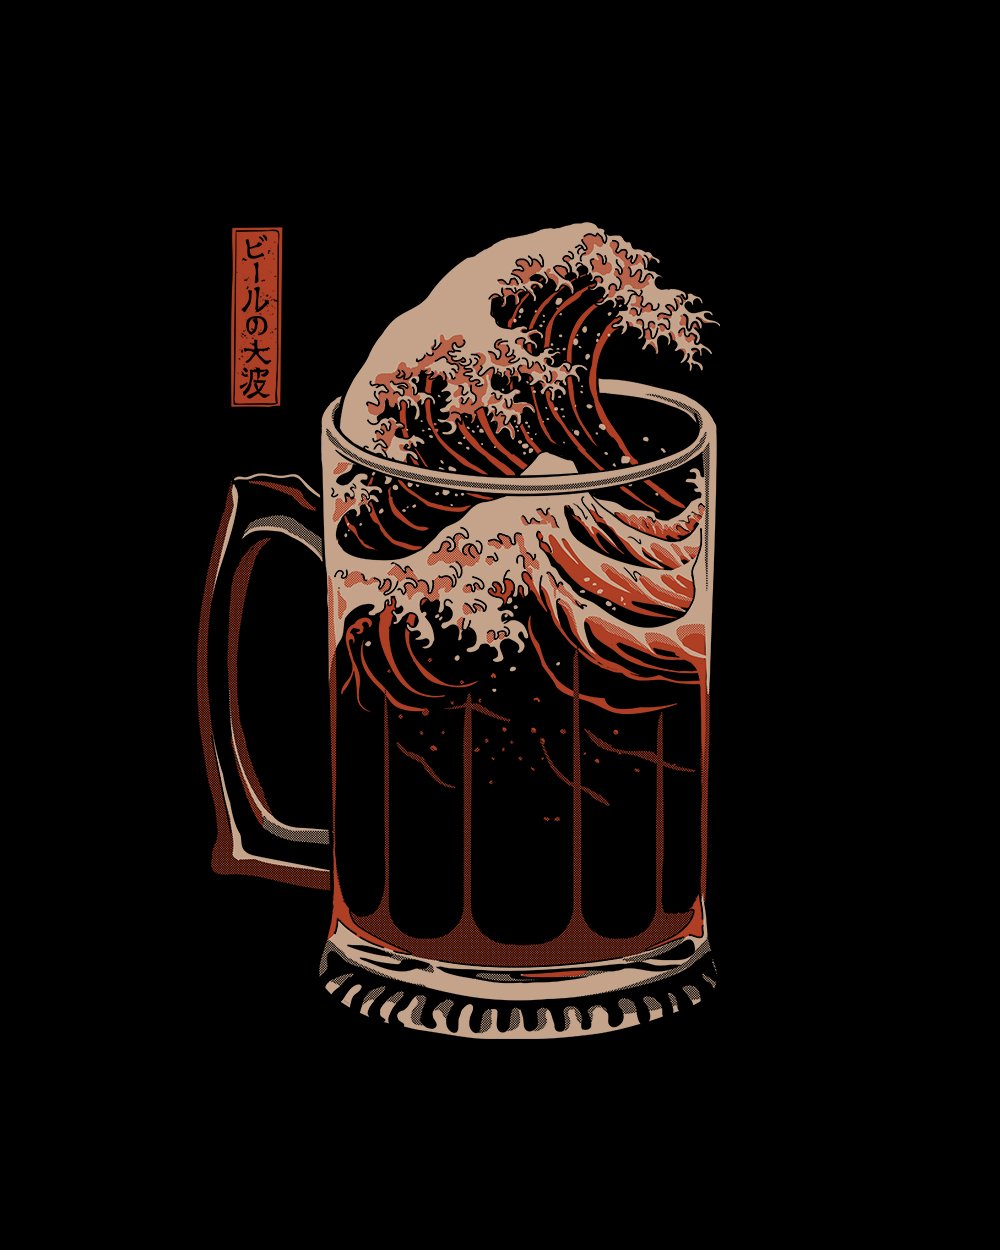 The Great Wave of Beer T-Shirt Australia Online #colour_black